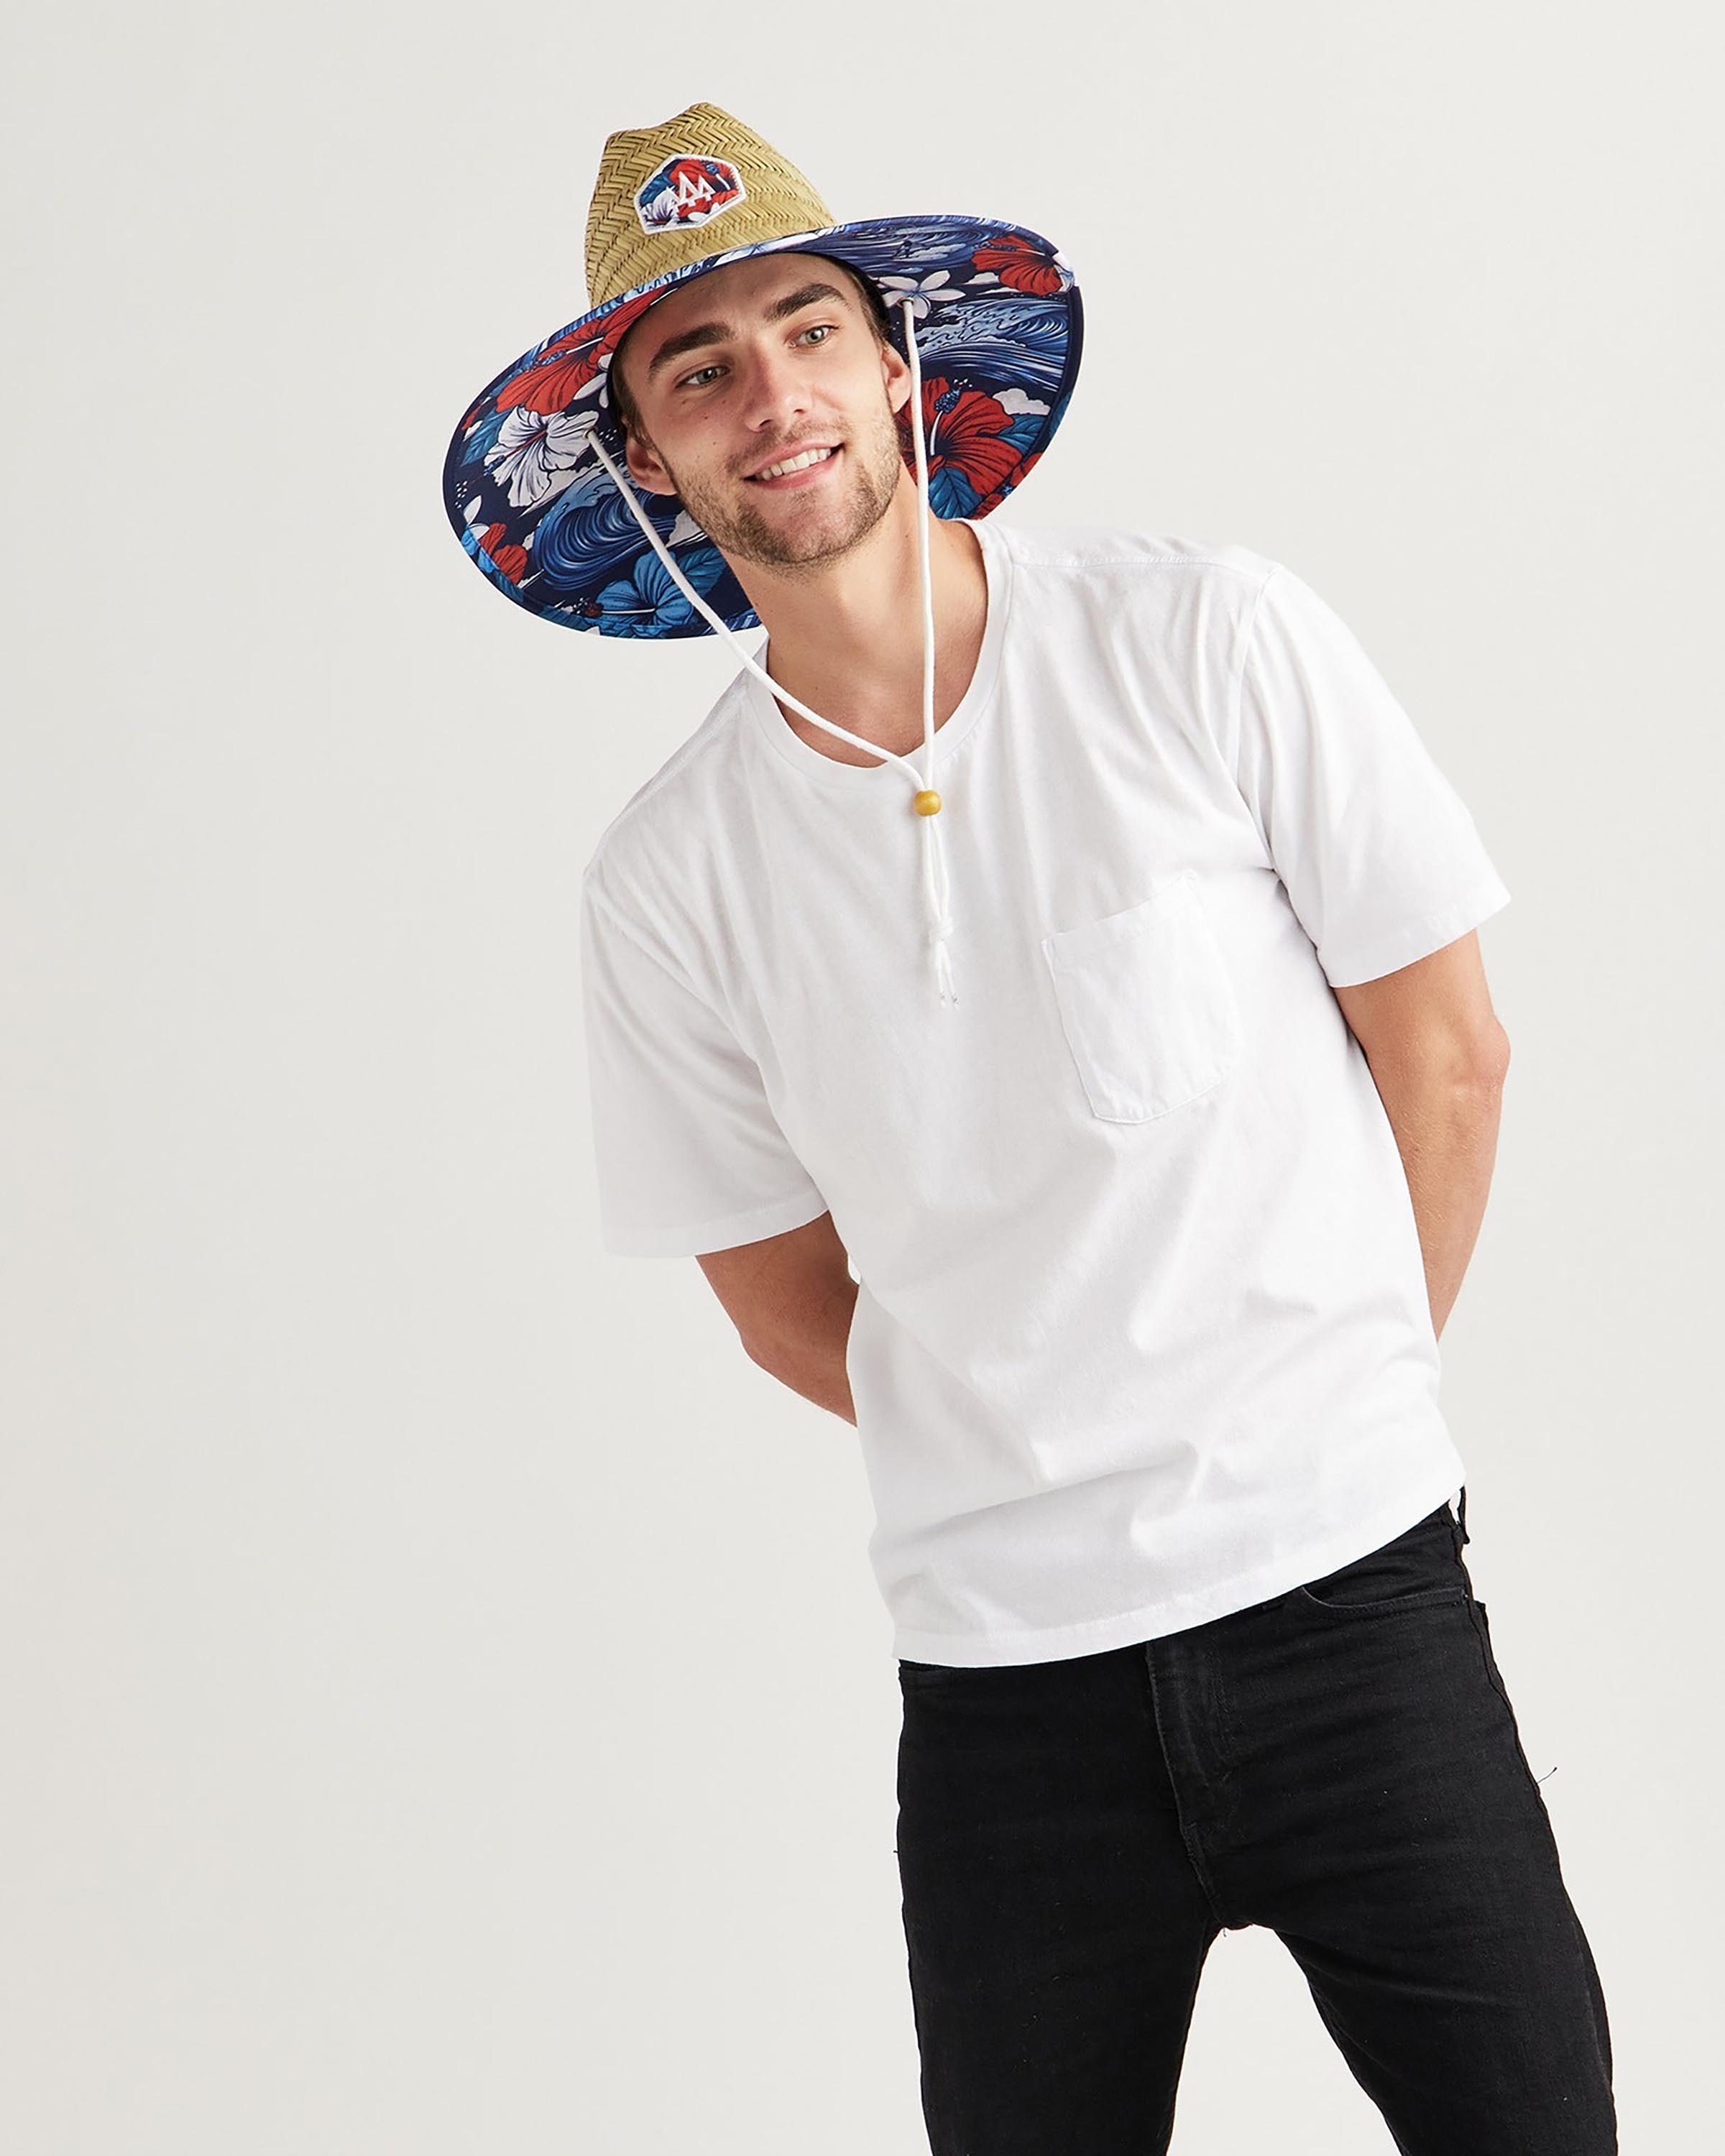 Hemlock male model leaning to the side wearing Midway straw lifeguard hat with USA floral pattern